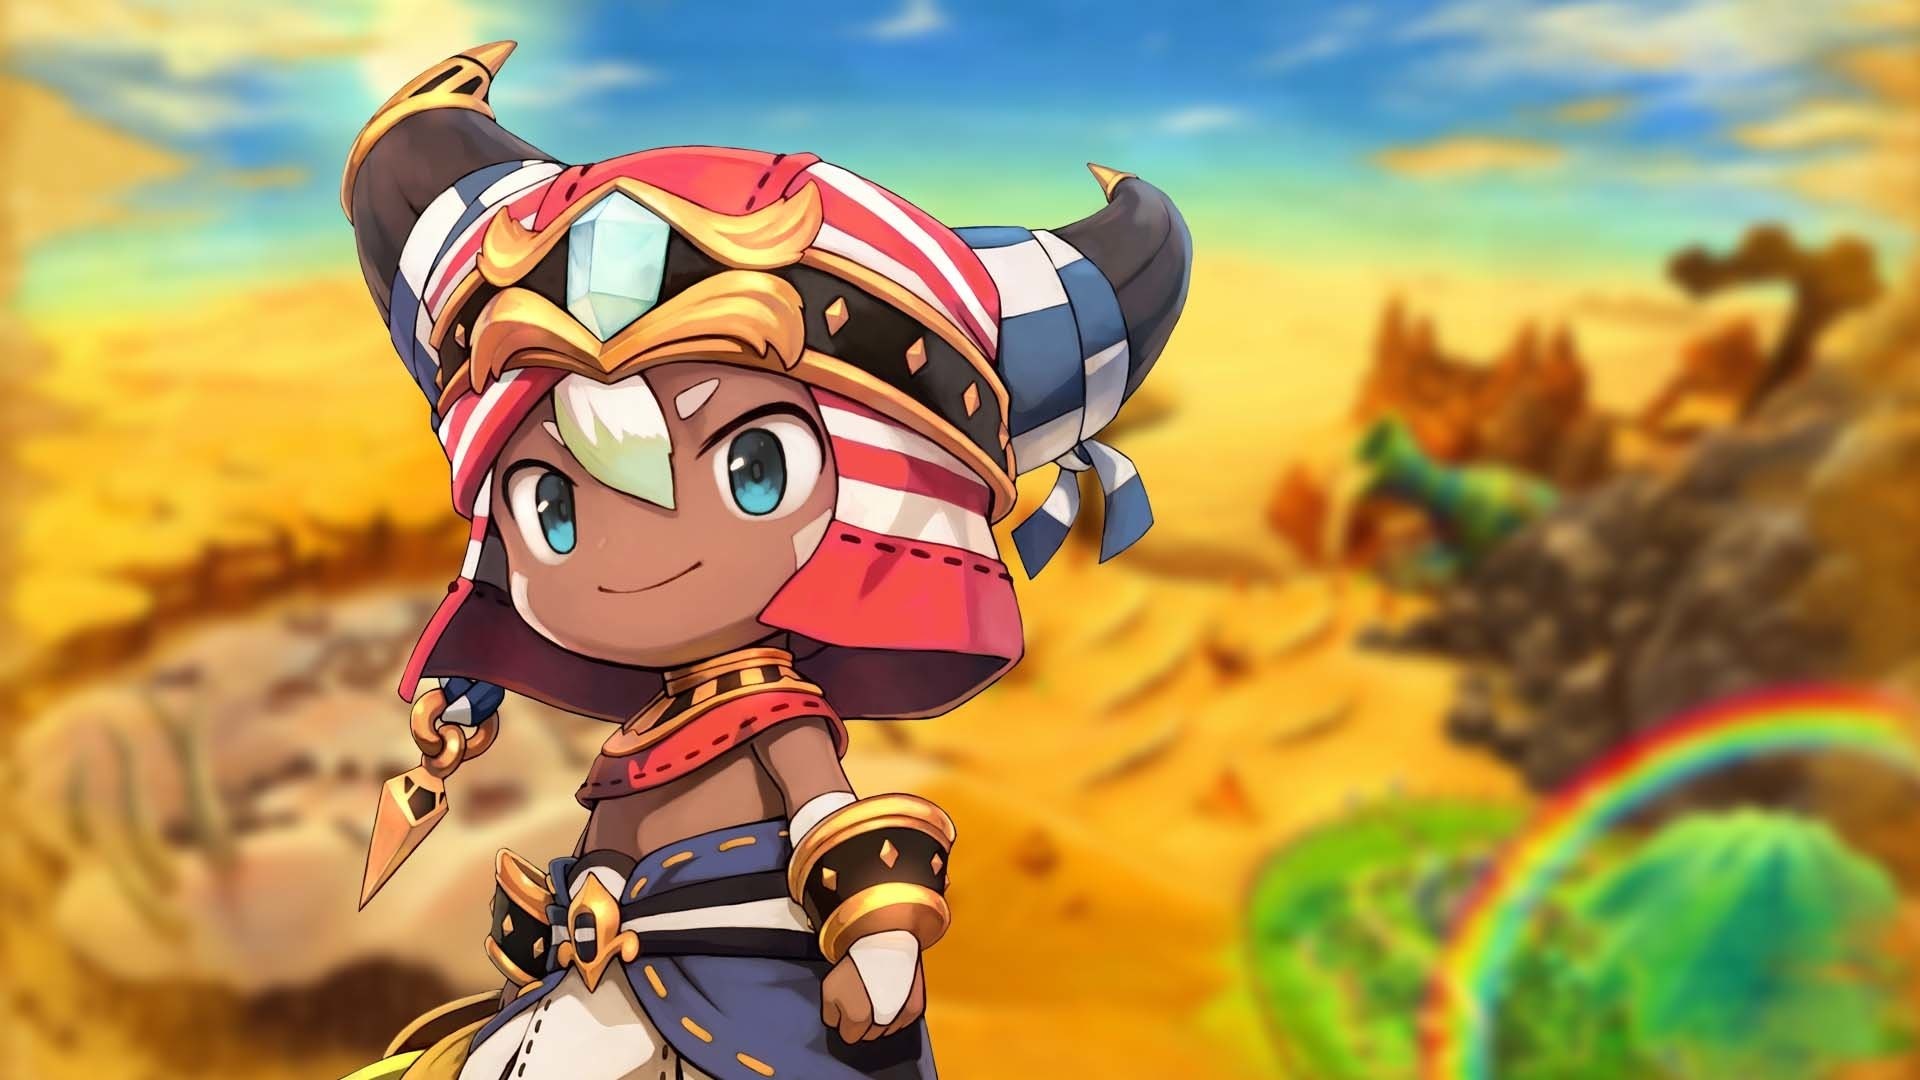 1920x1080 Video Game - Ever Oasis Wallpaper